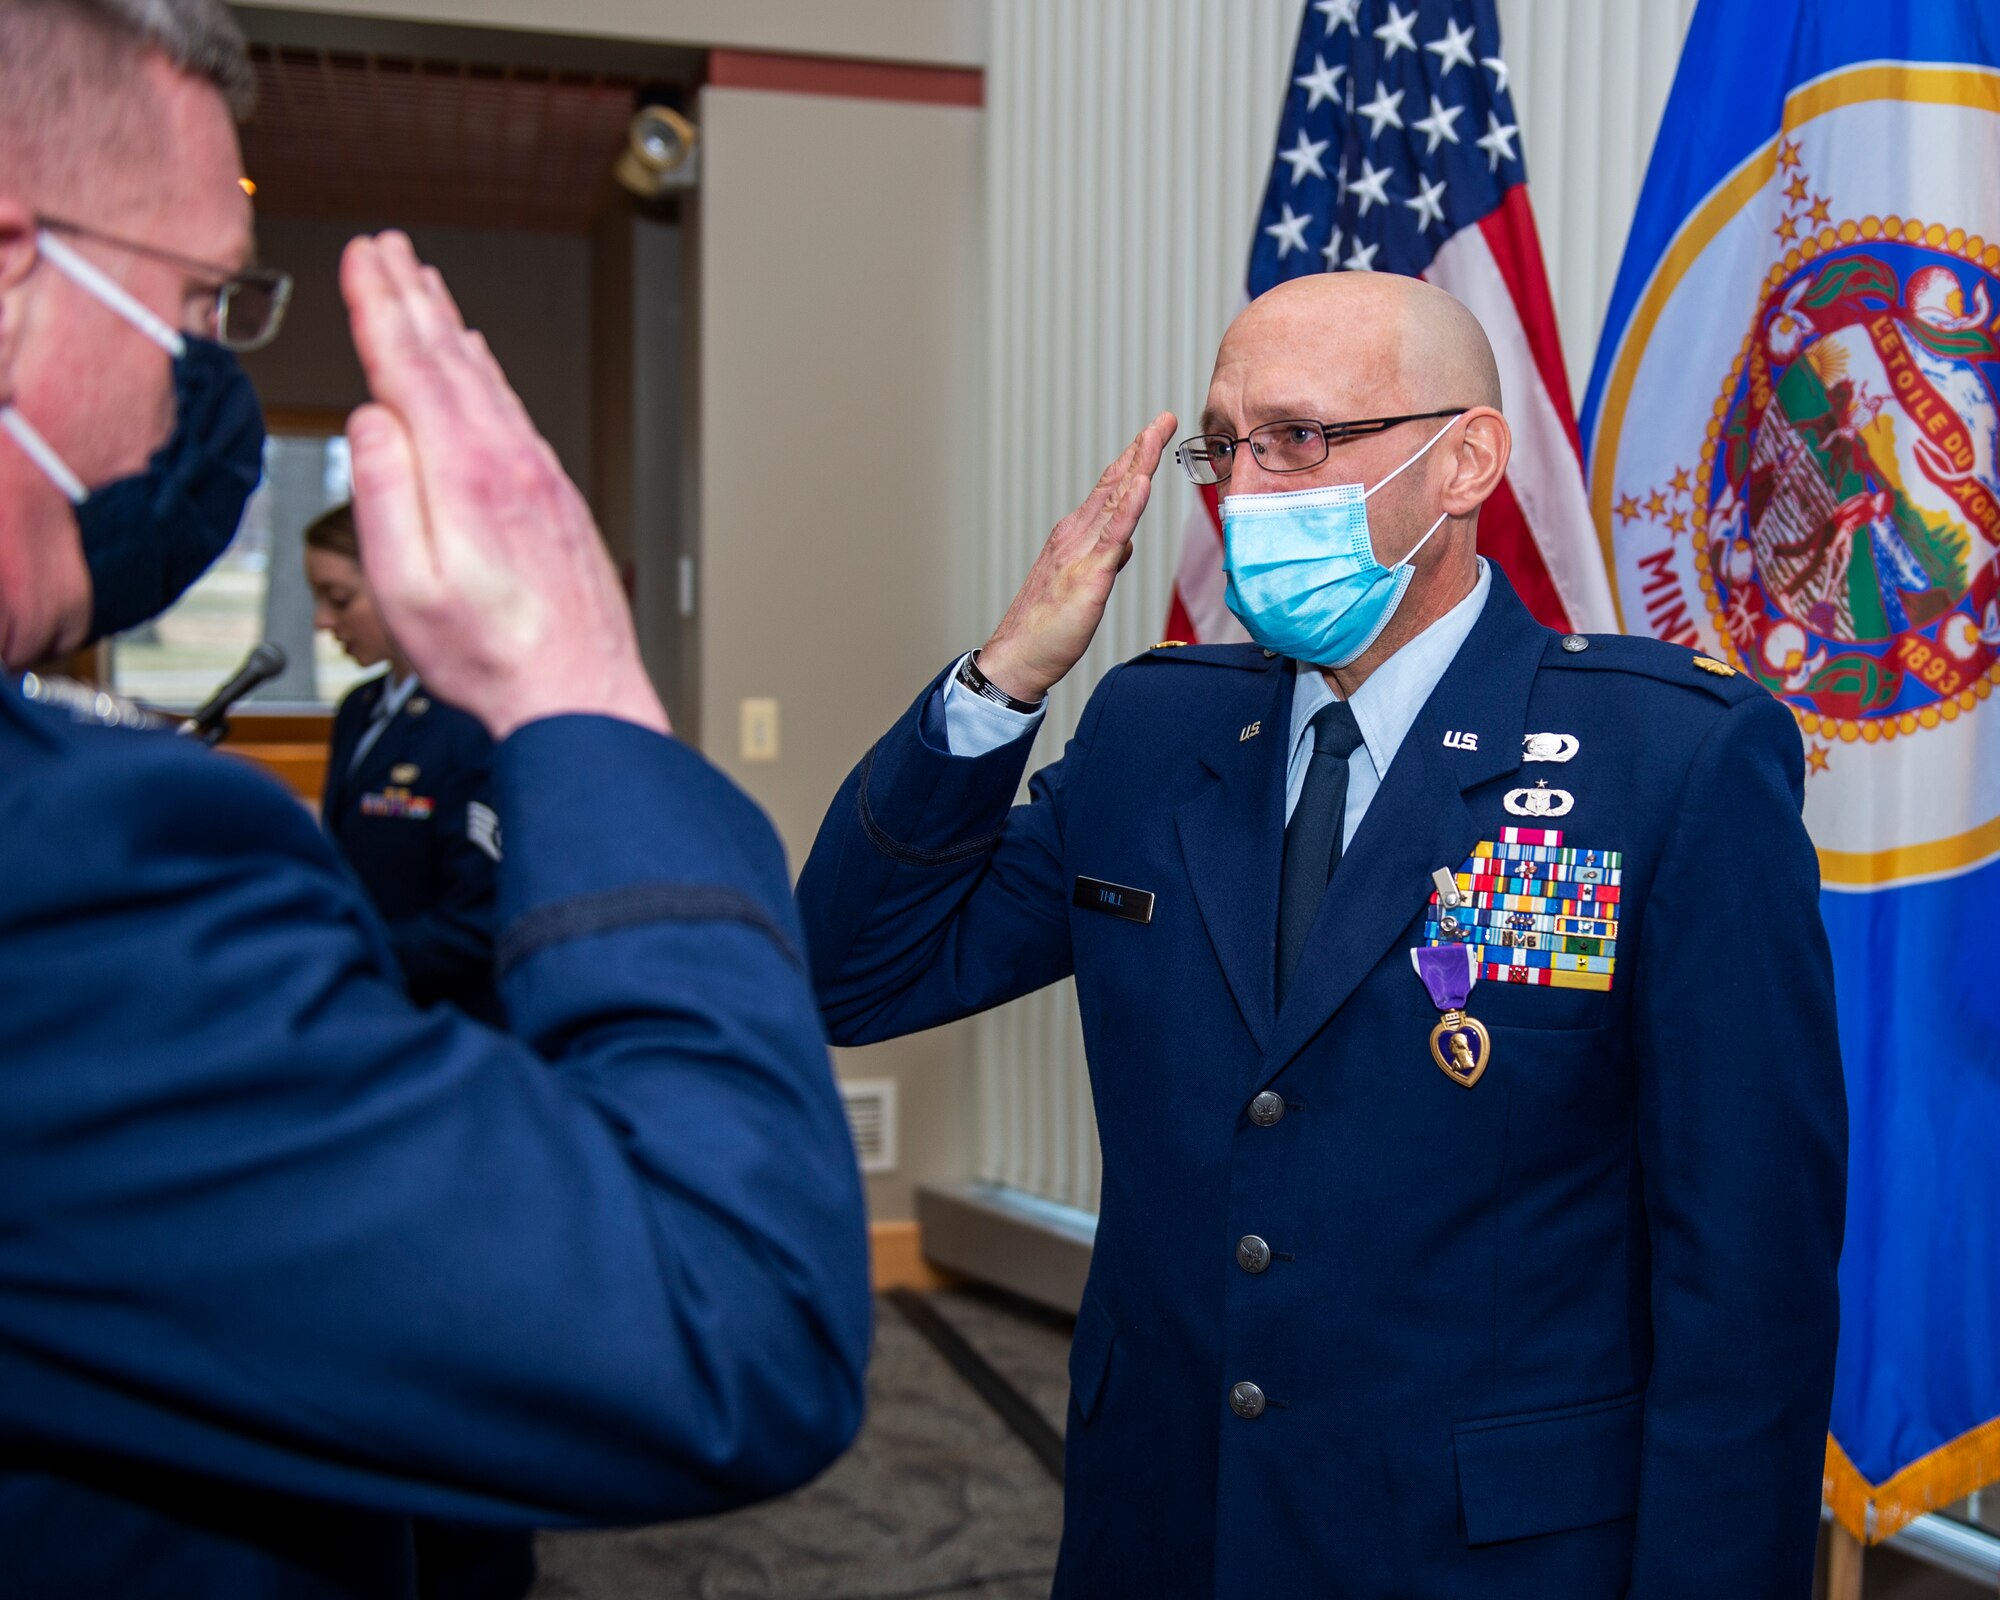 U.S. Air Force Maj. Allen Thill receives the Purple Heart award after sustaining injuries during his most recent deployment to Iraq in St. Paul, Minn., Dec. 12, 2020.